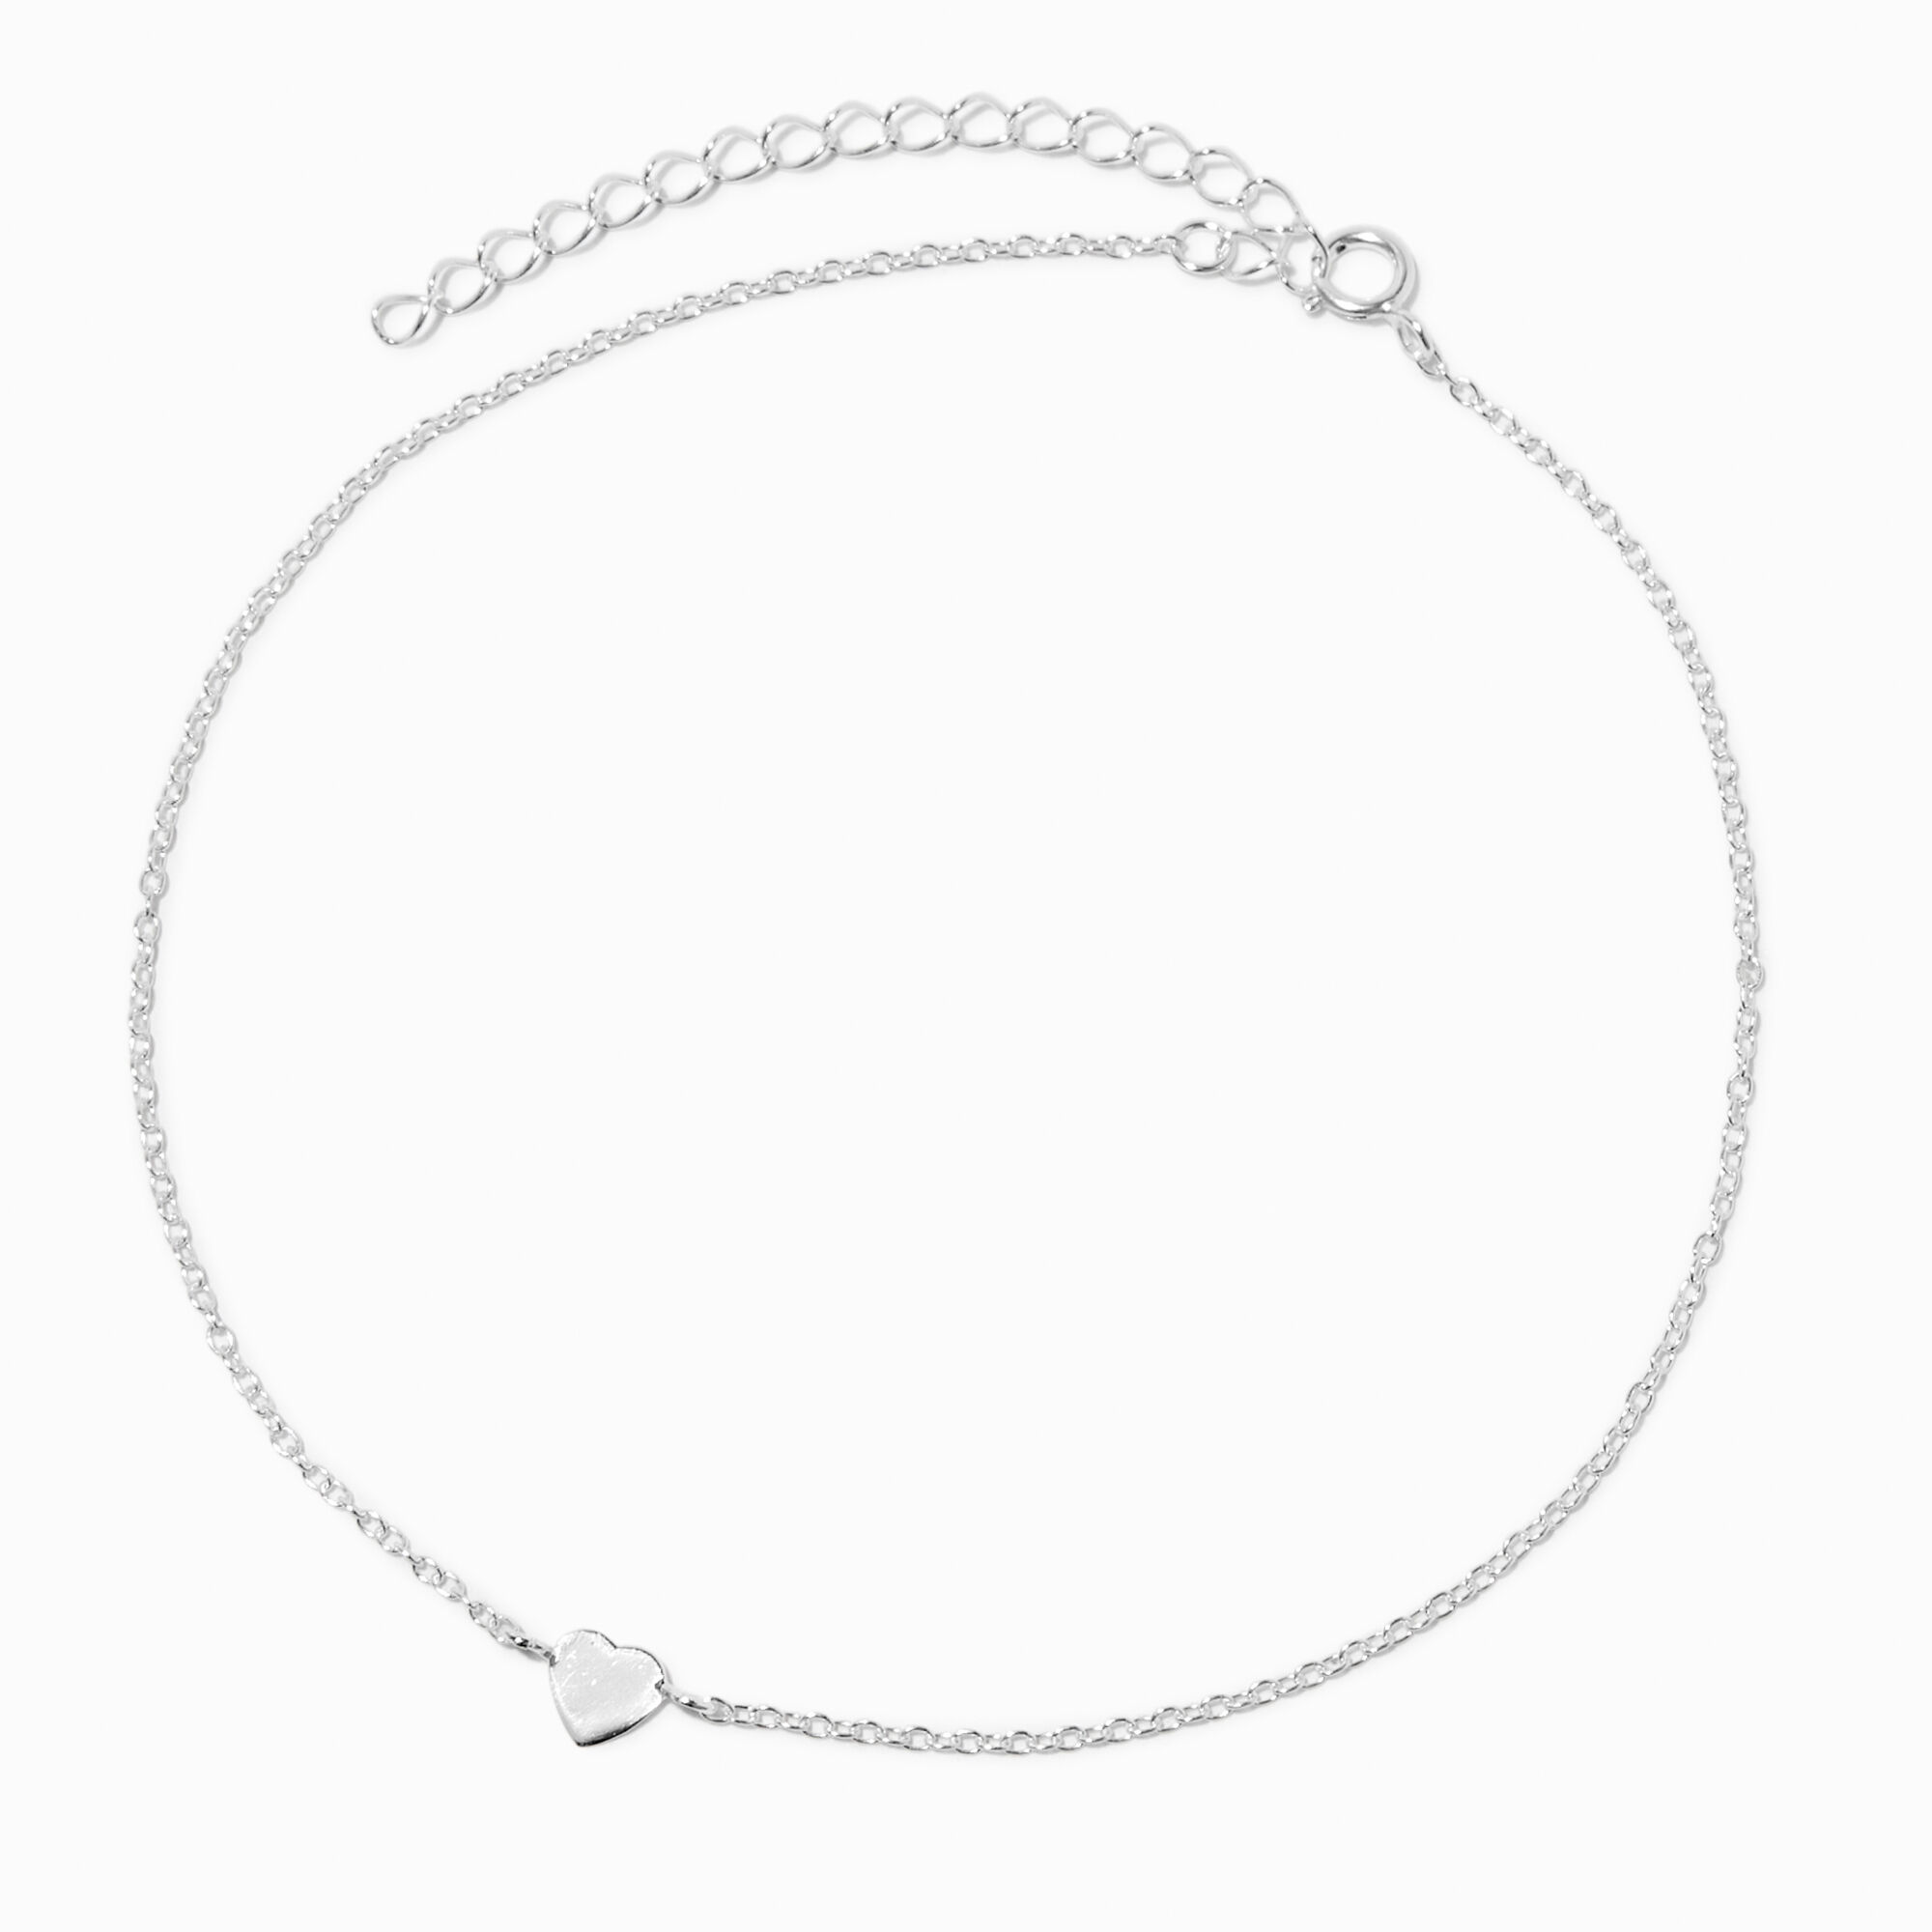 View C Luxe By Claires Heart Charm Chain Anklet Silver information